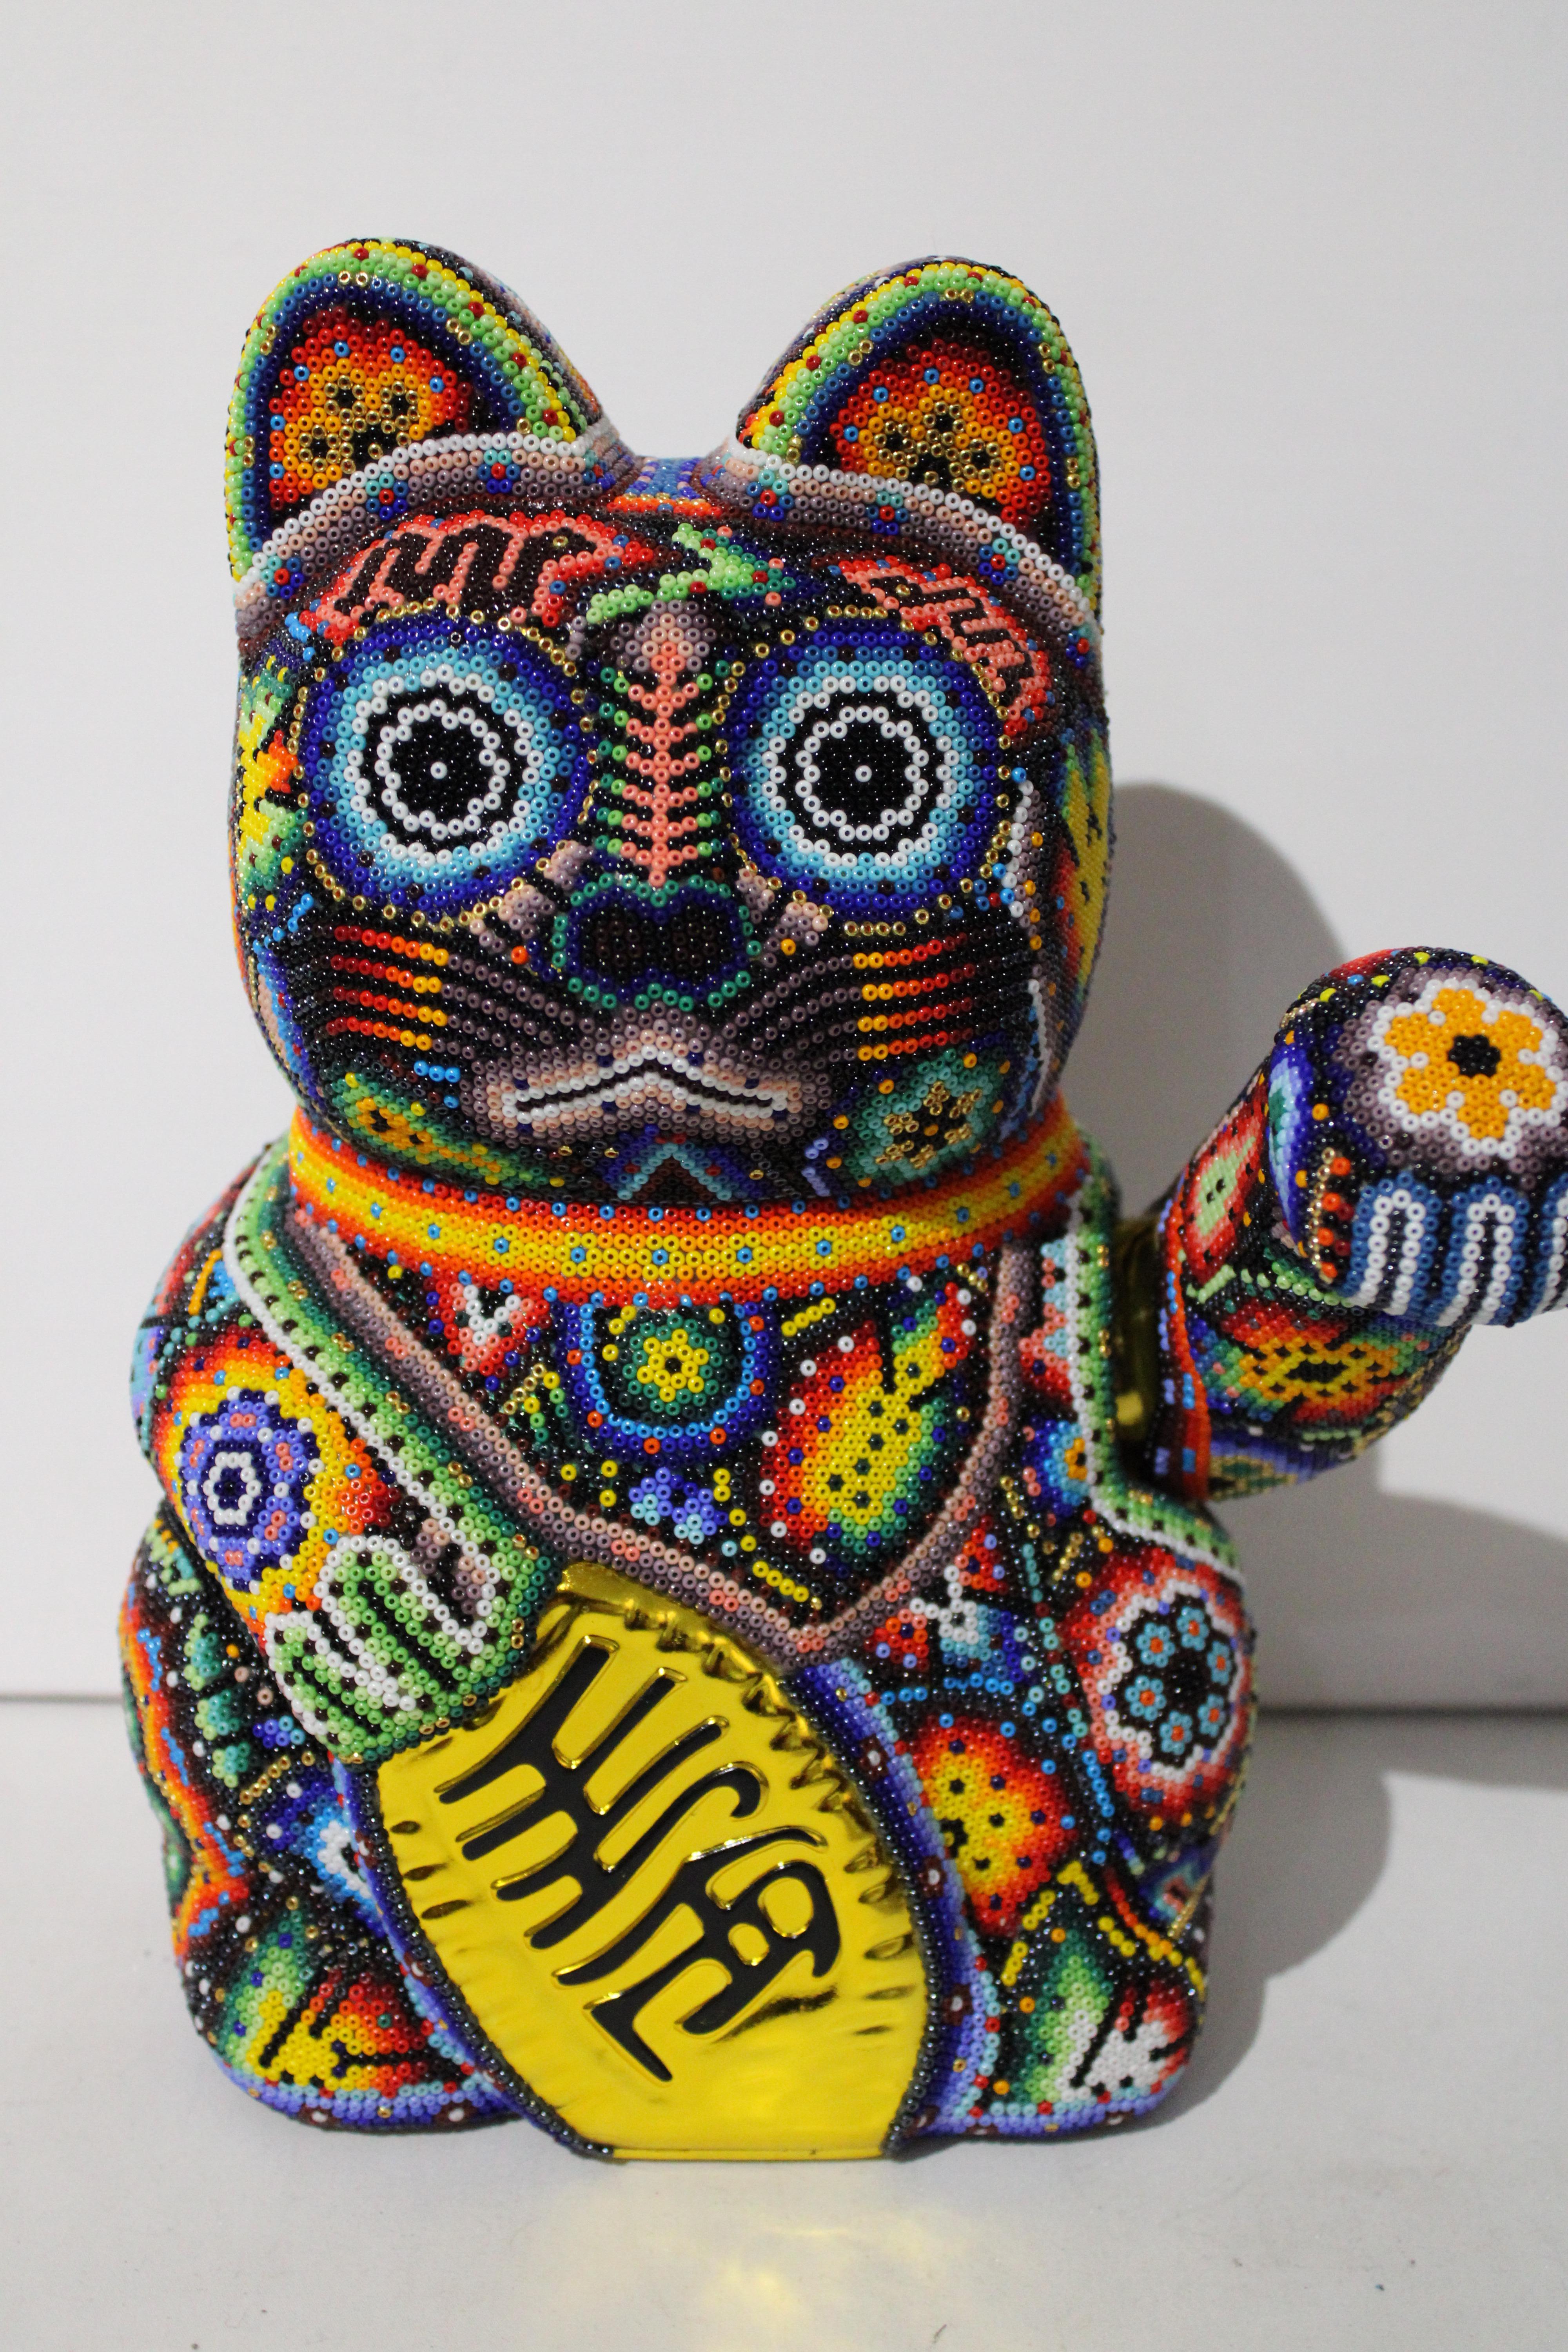 Money Cat from Huichol ALTERATIONS Series - Sculpture by CHROMA aka Rick Wolfryd 